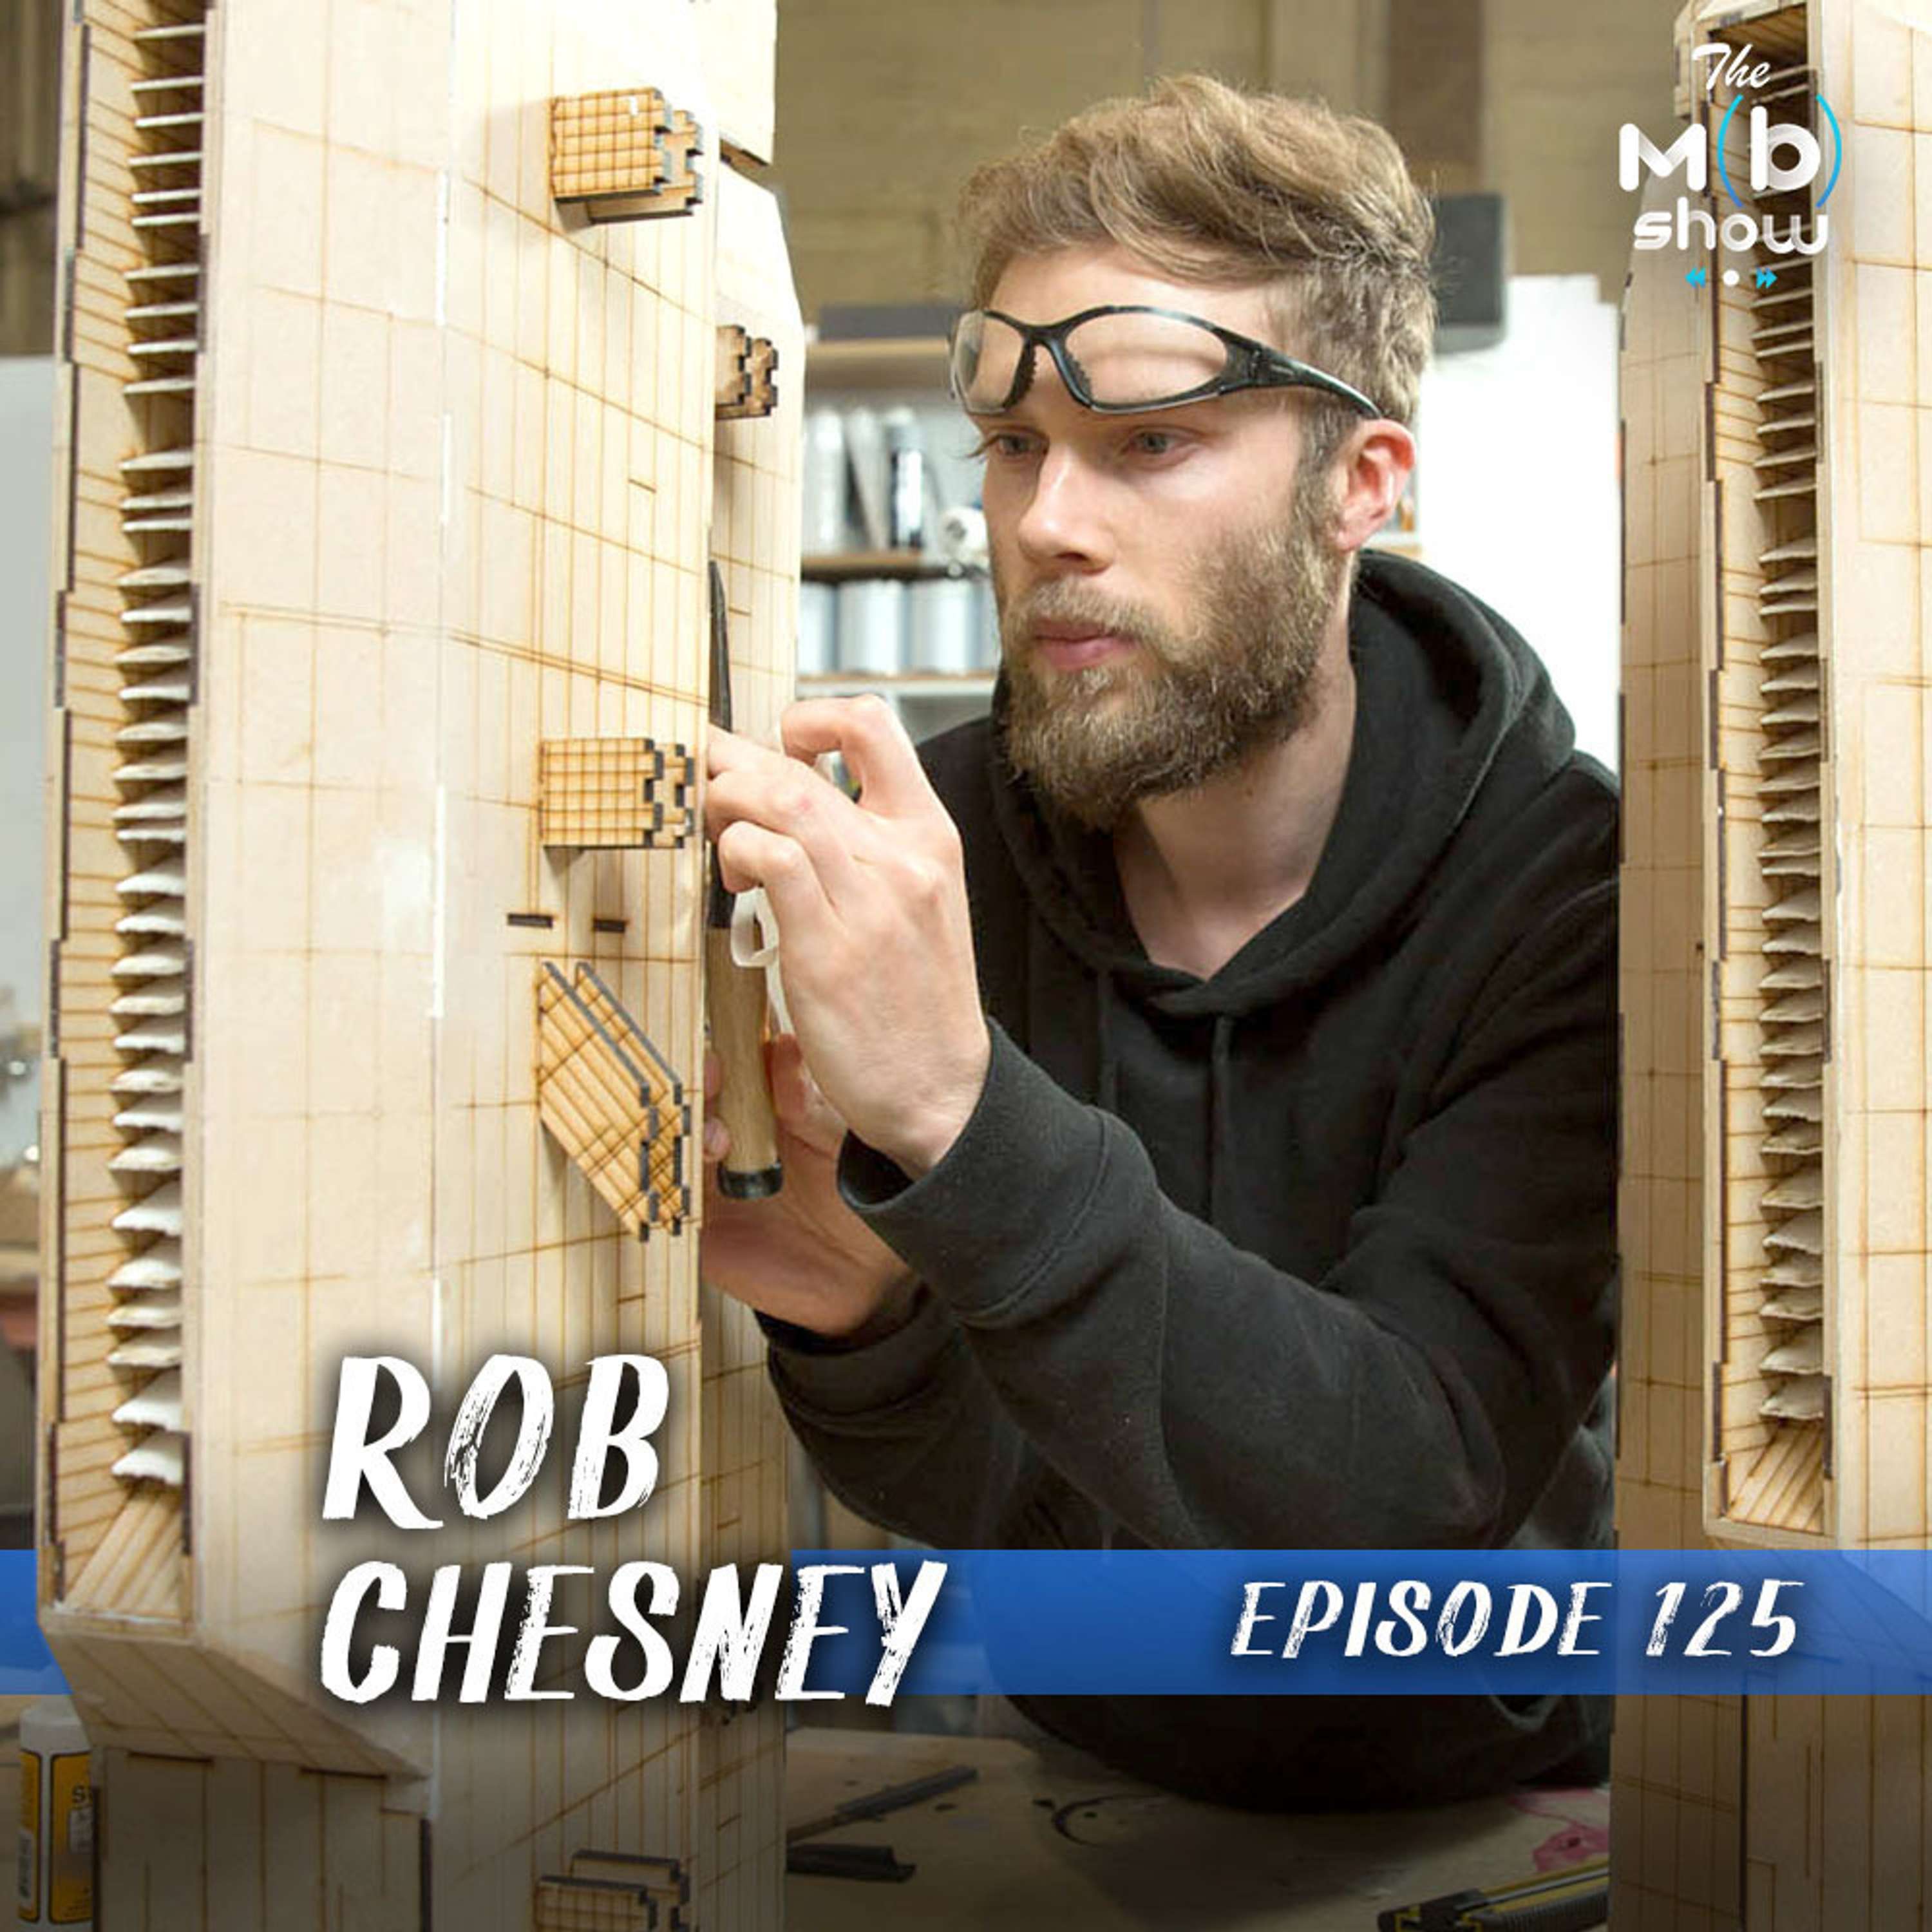 Making Laser Cutters and Weta Workshop with Rob Chesney